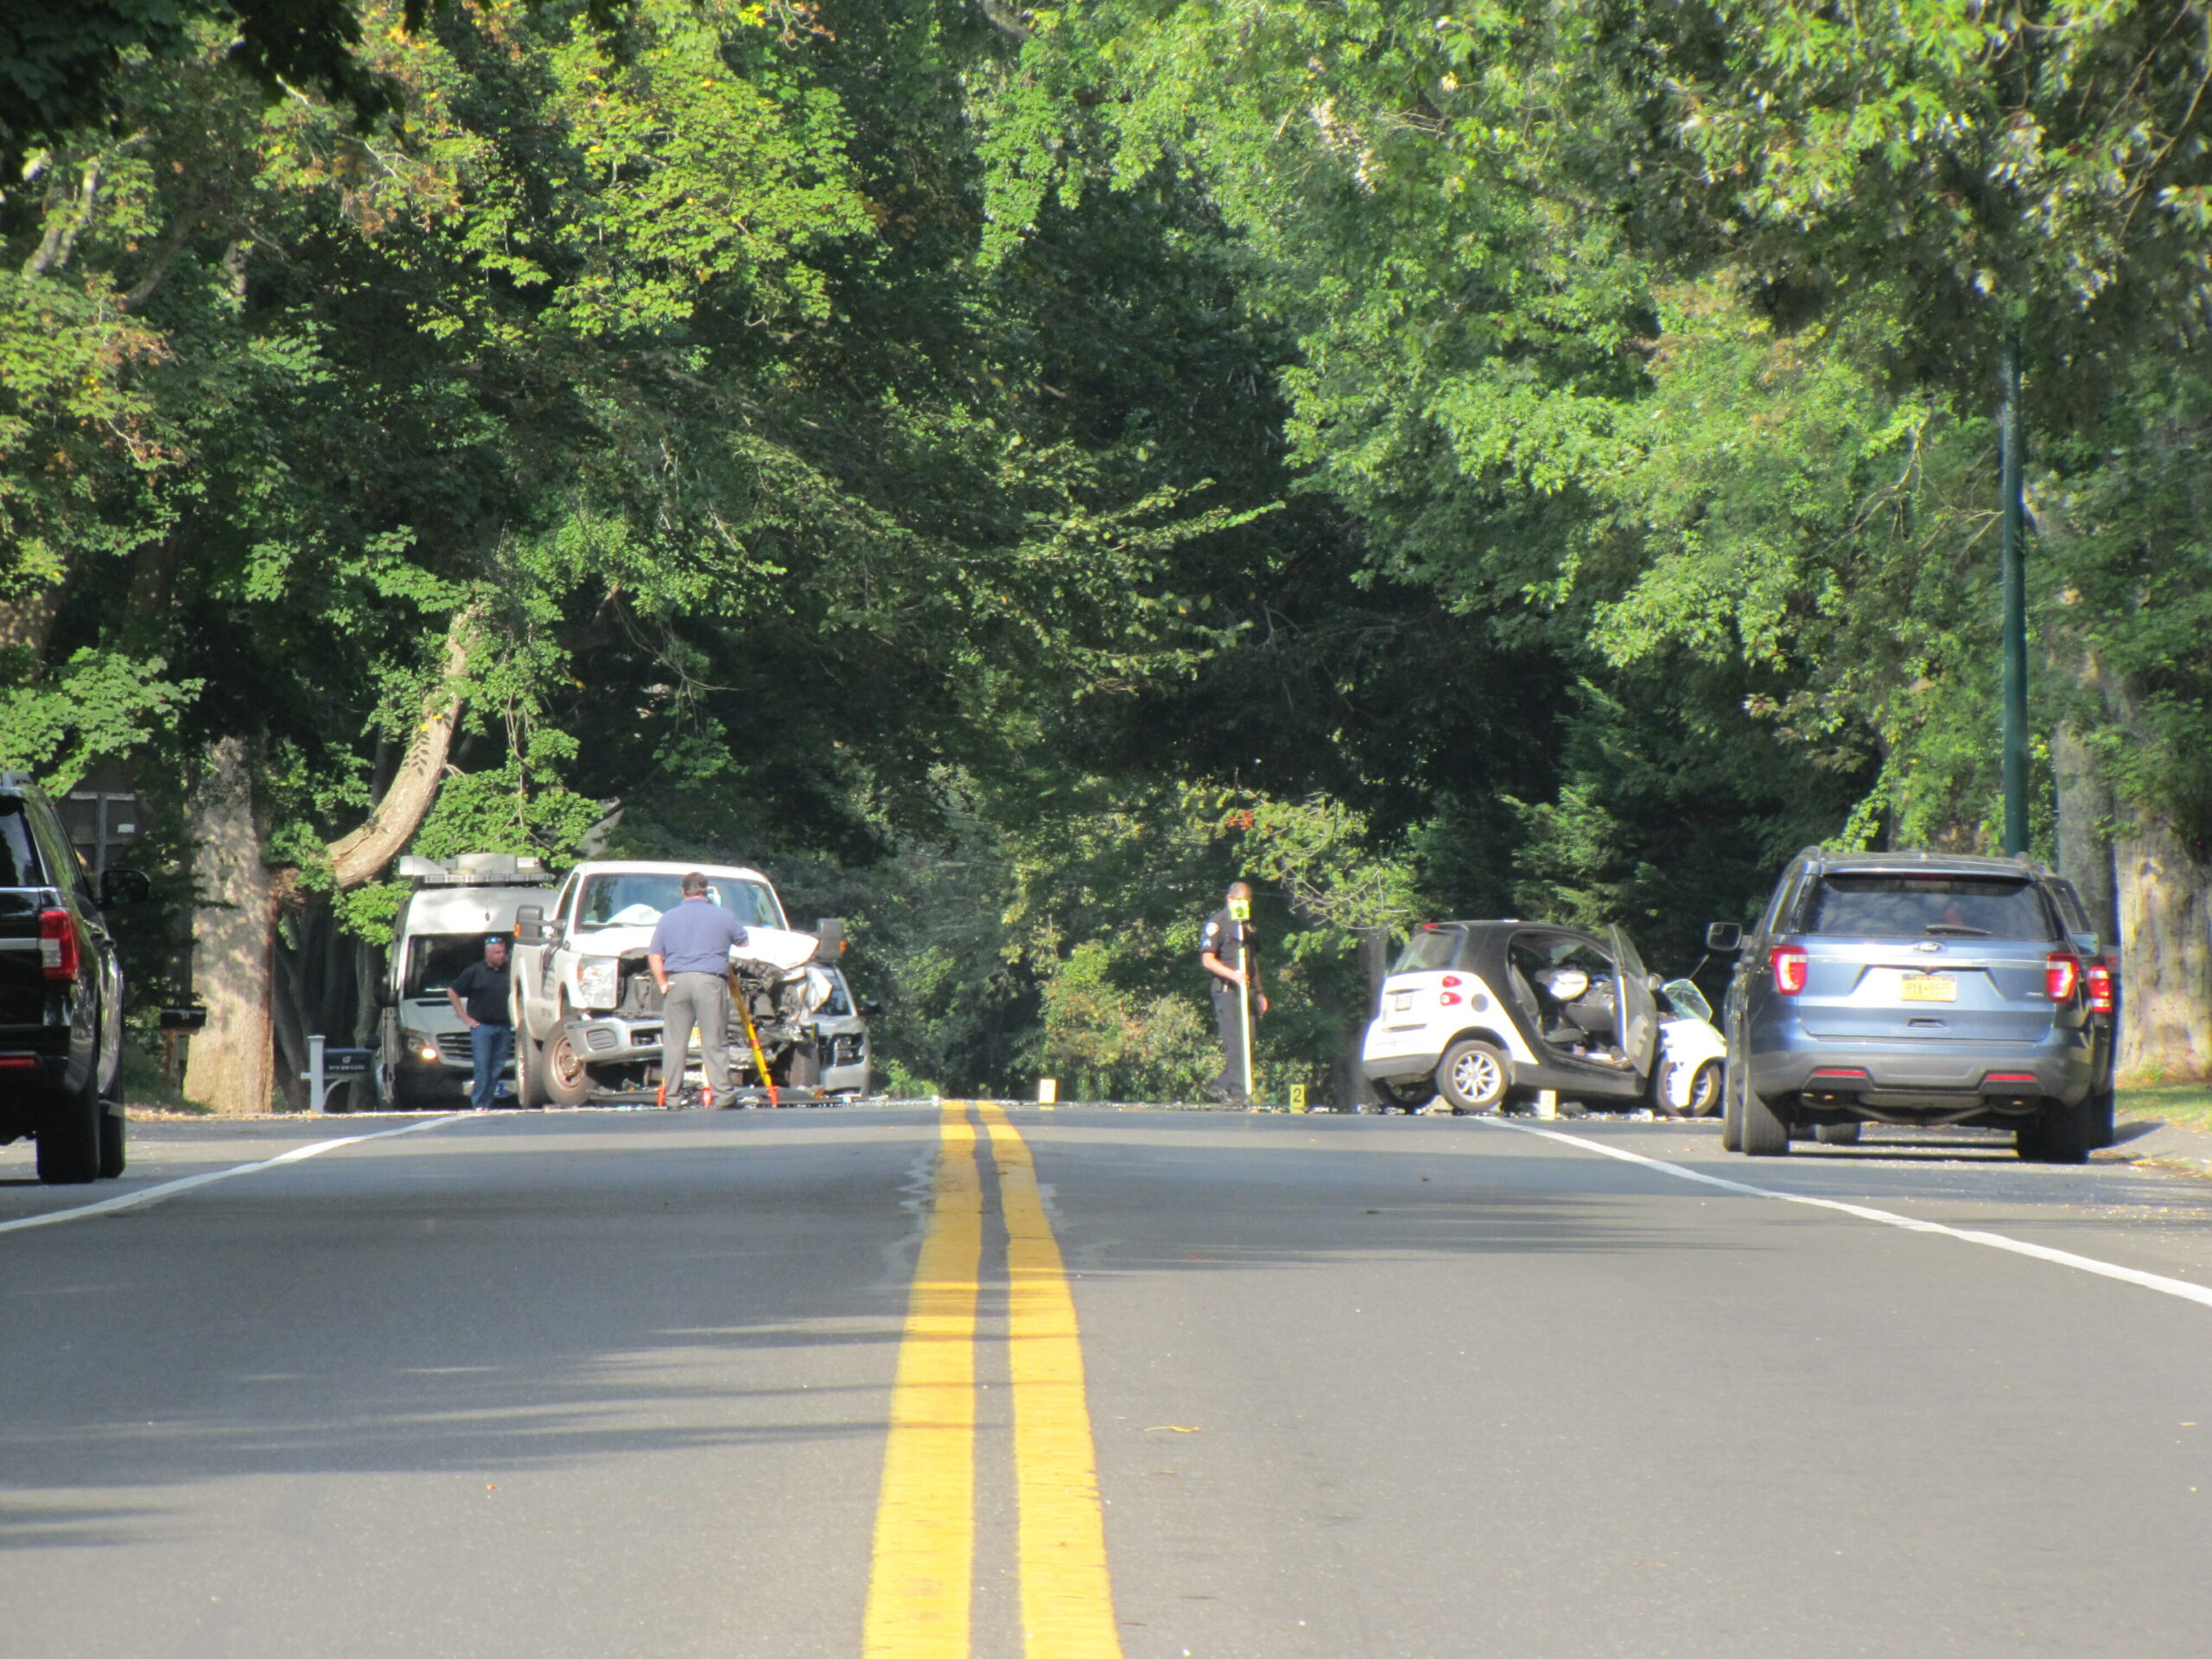 Woods Lane in East Hampton Village is closed while police reconstruct a car accident that sent a man to the hospital with severe injuries on Monday morning.